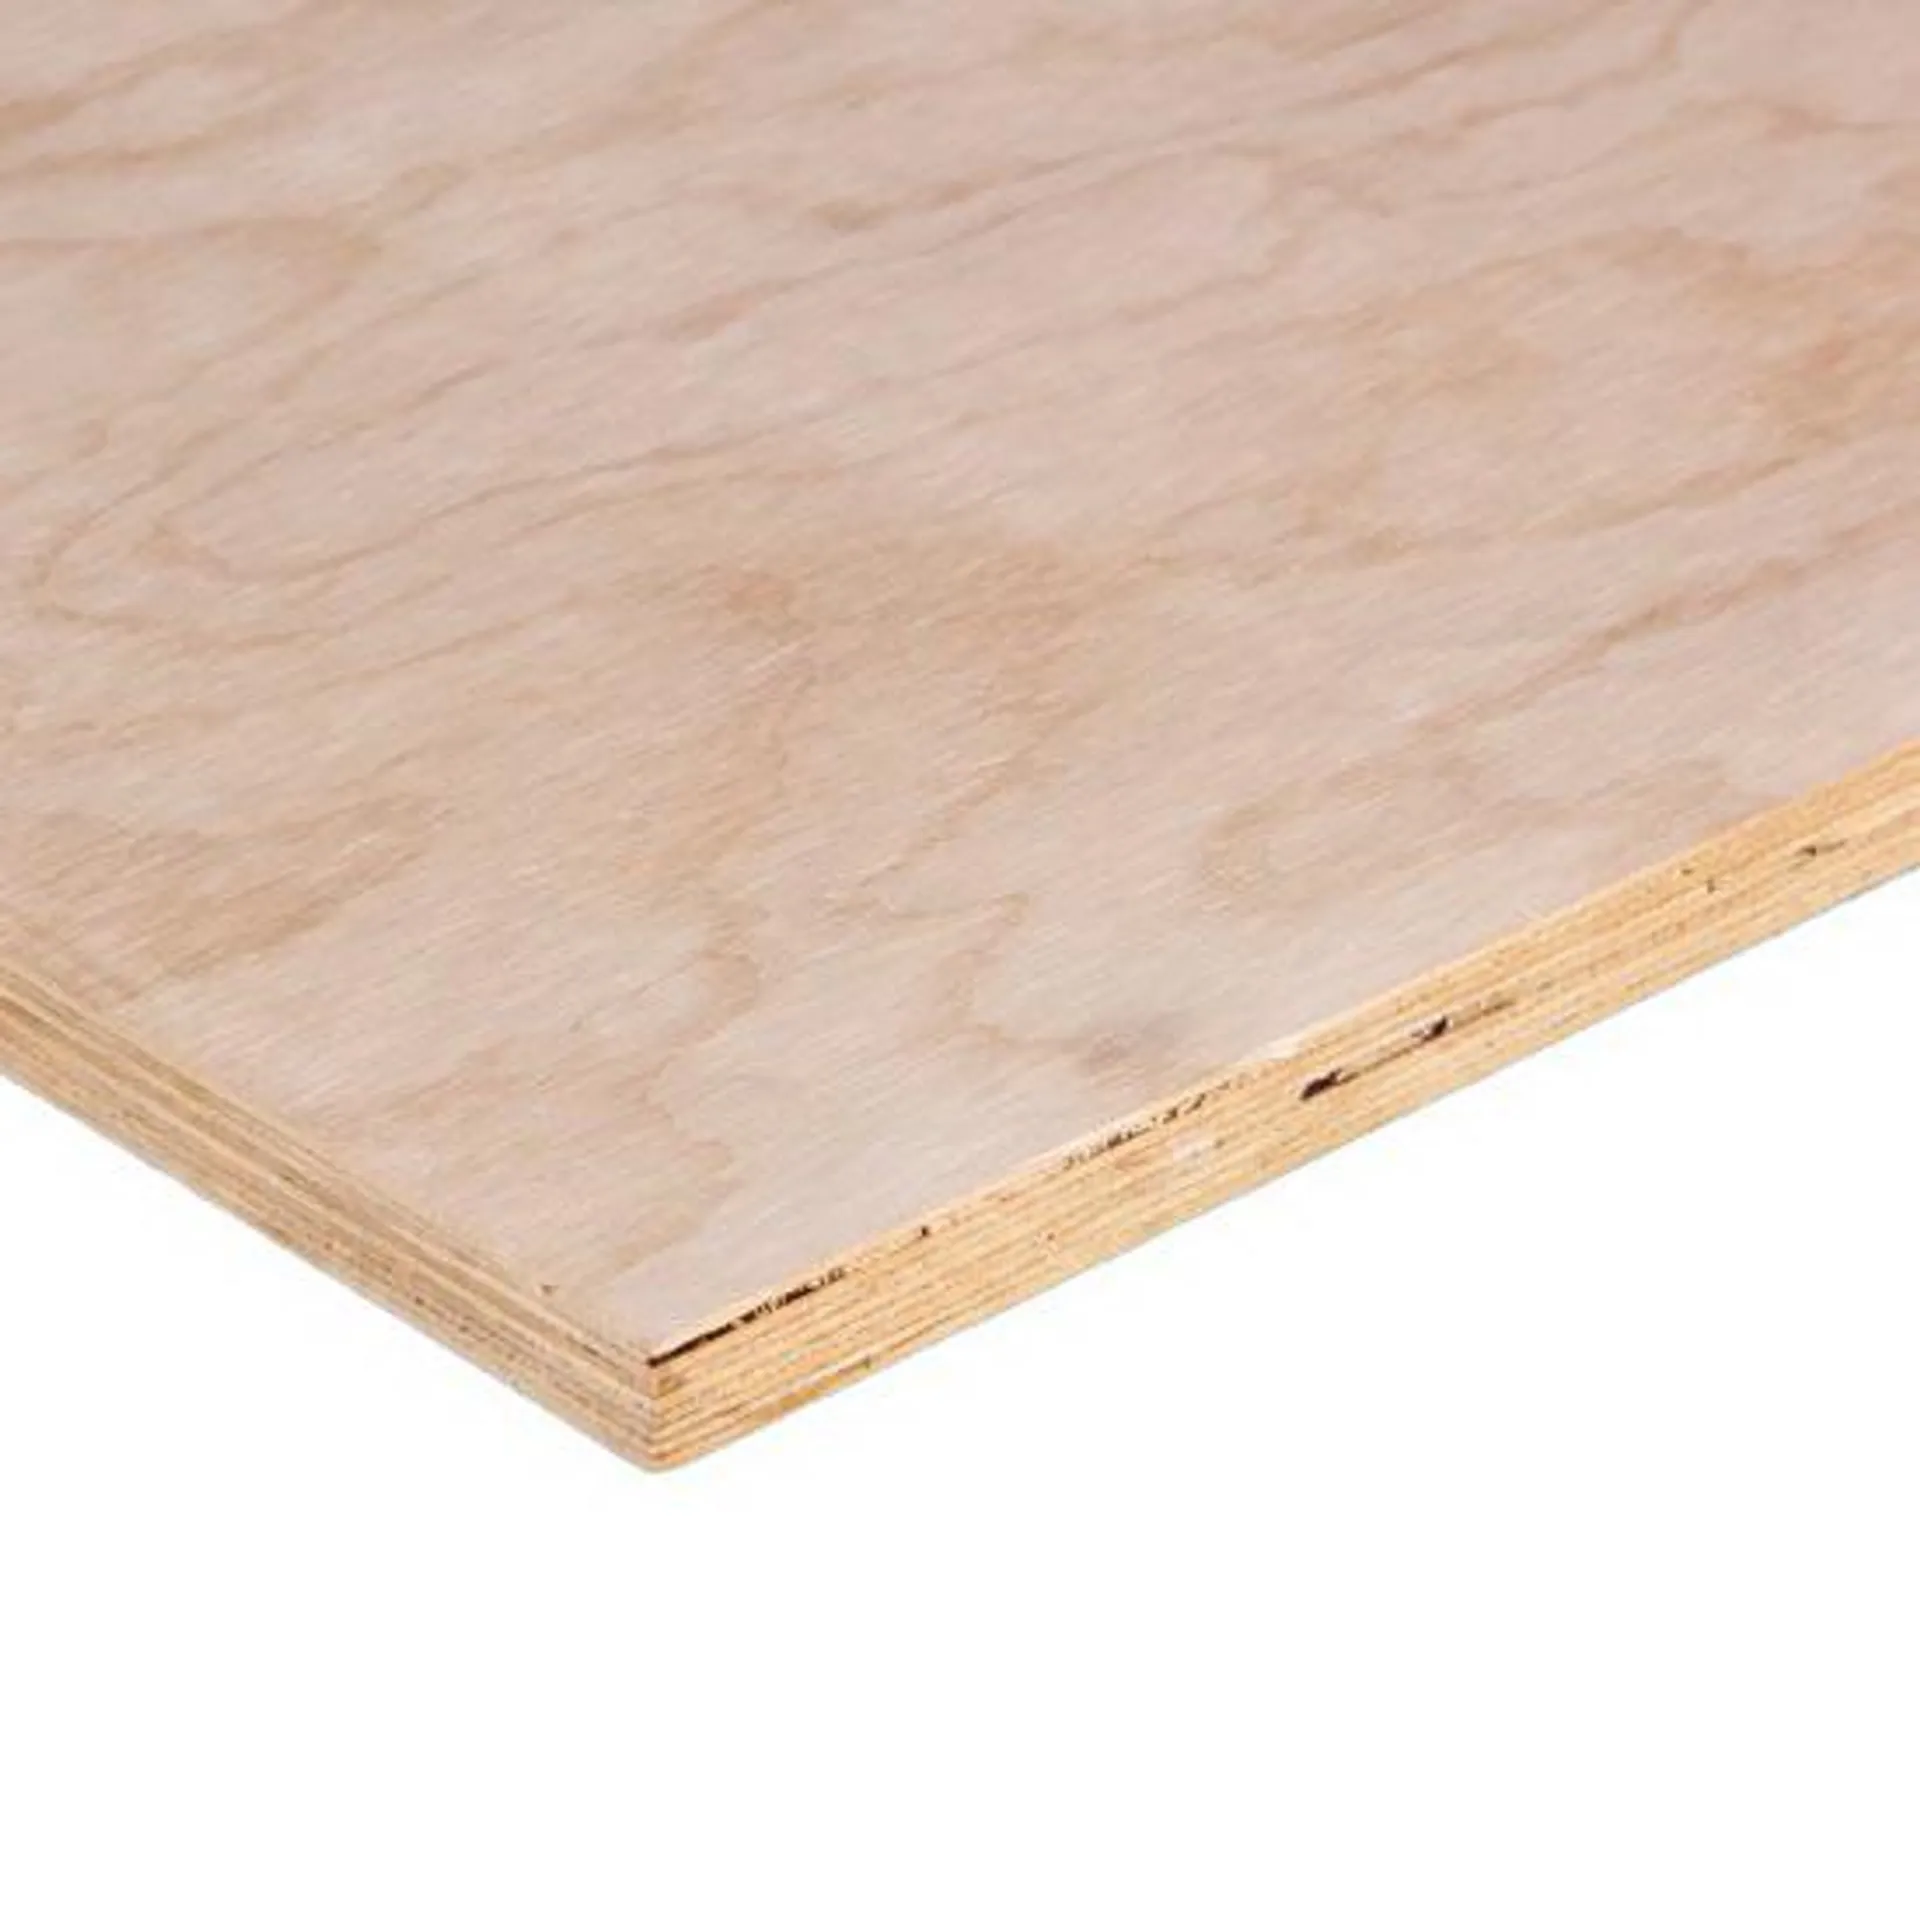 BC Plywood, 19/32 in x 4 ft x 8 ft - Southern Pine